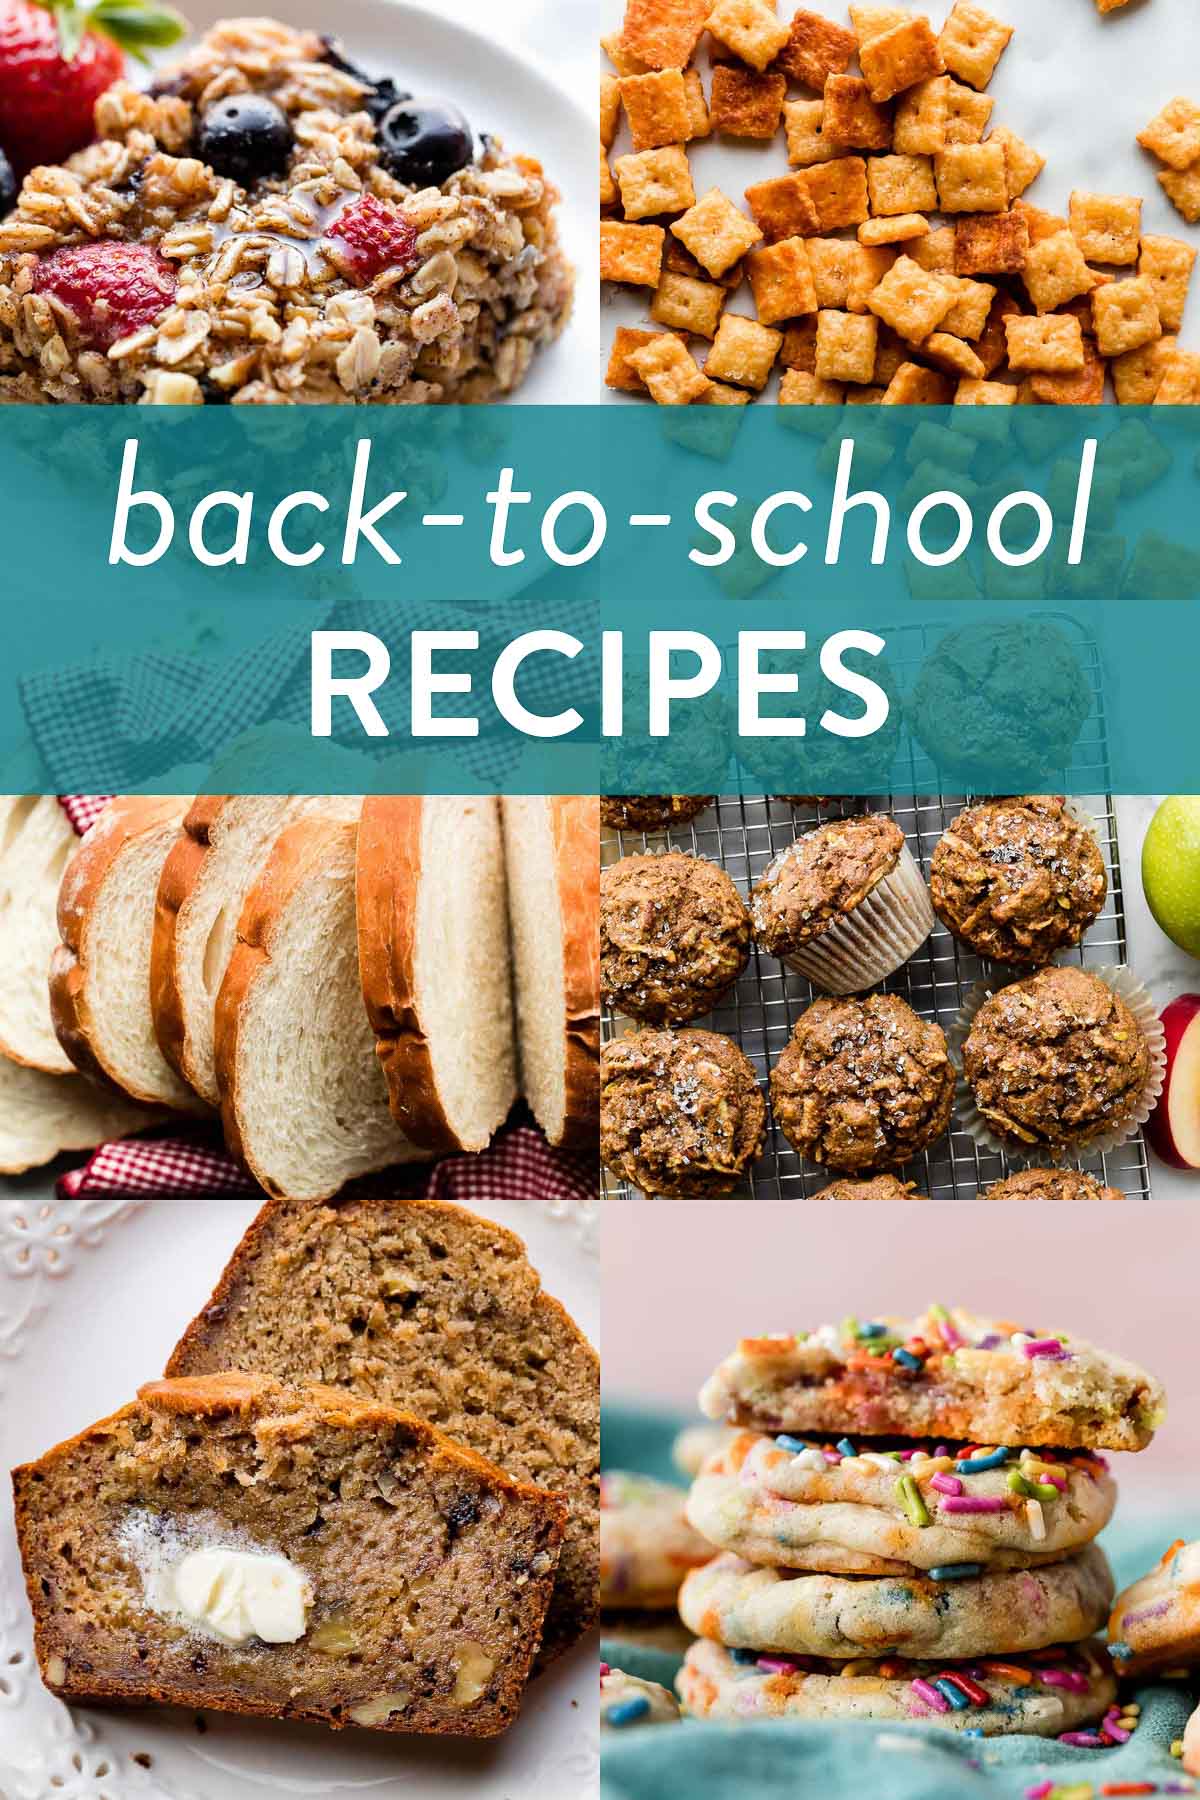 collage of back-to-school recipes including banana bread, sugar cookies, healthy apple muffins, sandwich bread, homemade cheese crackers, and baked oatmeal.